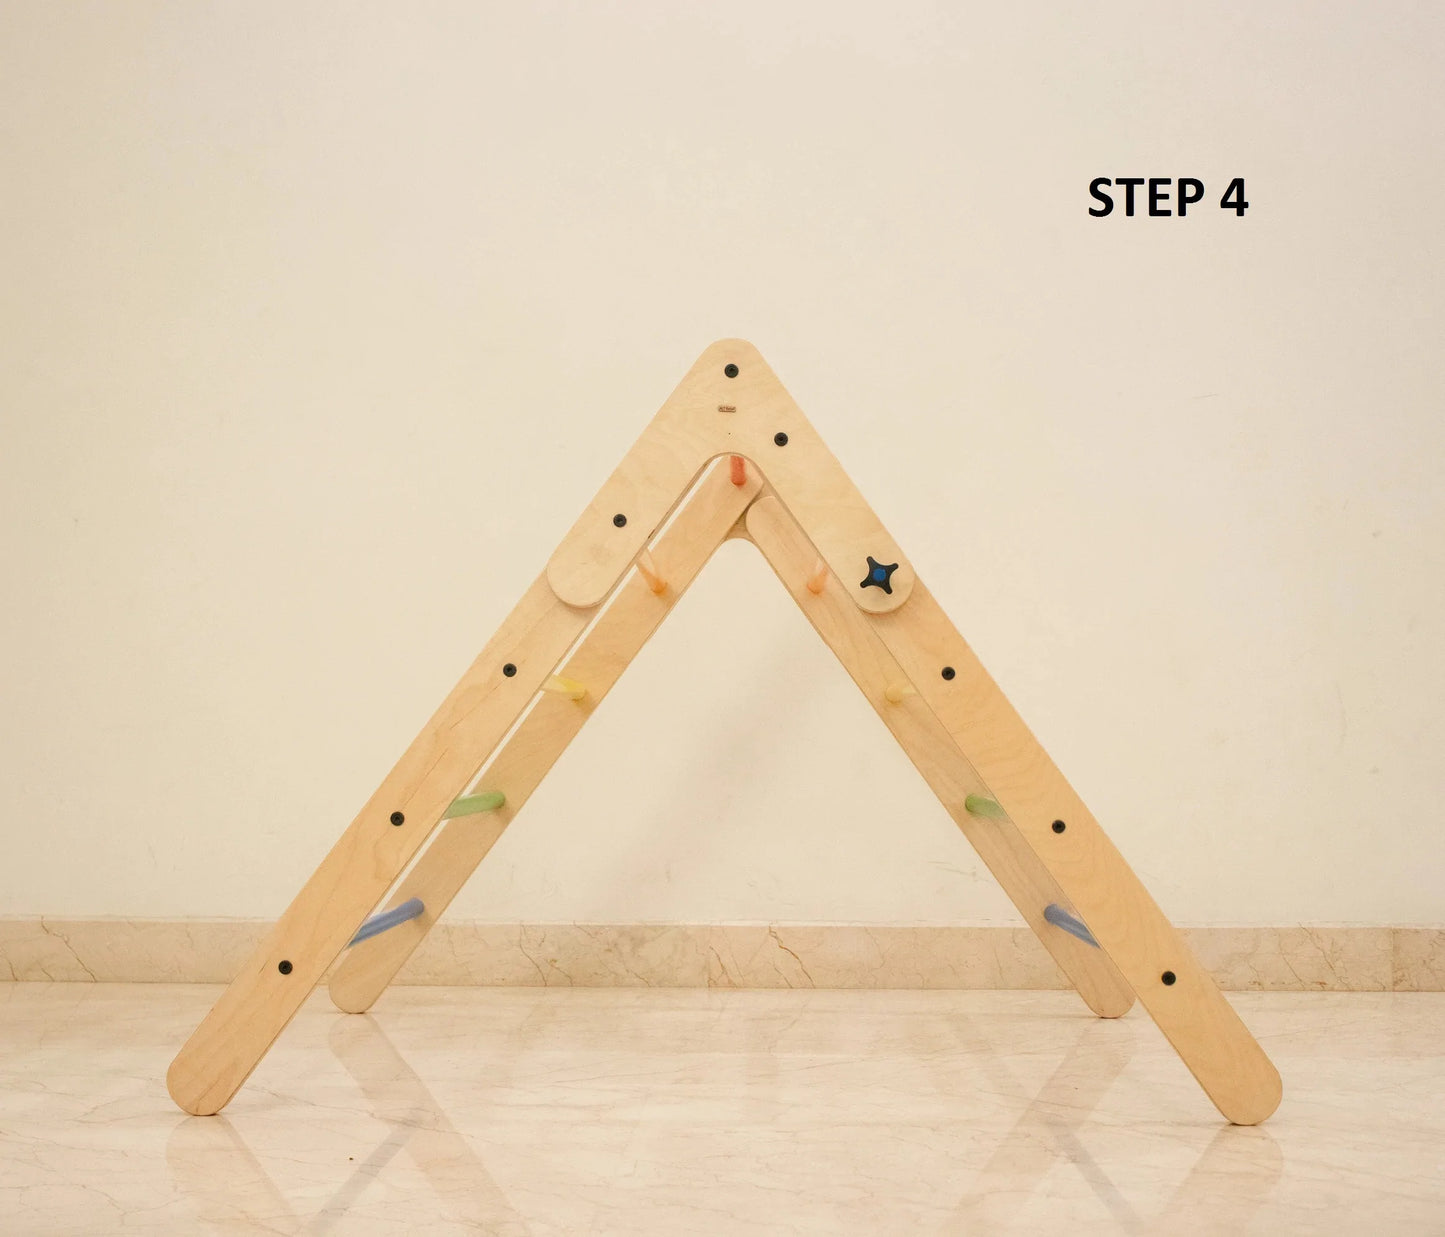 Buy The Wooden Climbing Pikler Triangle - Step 3 - SkilloToys.com